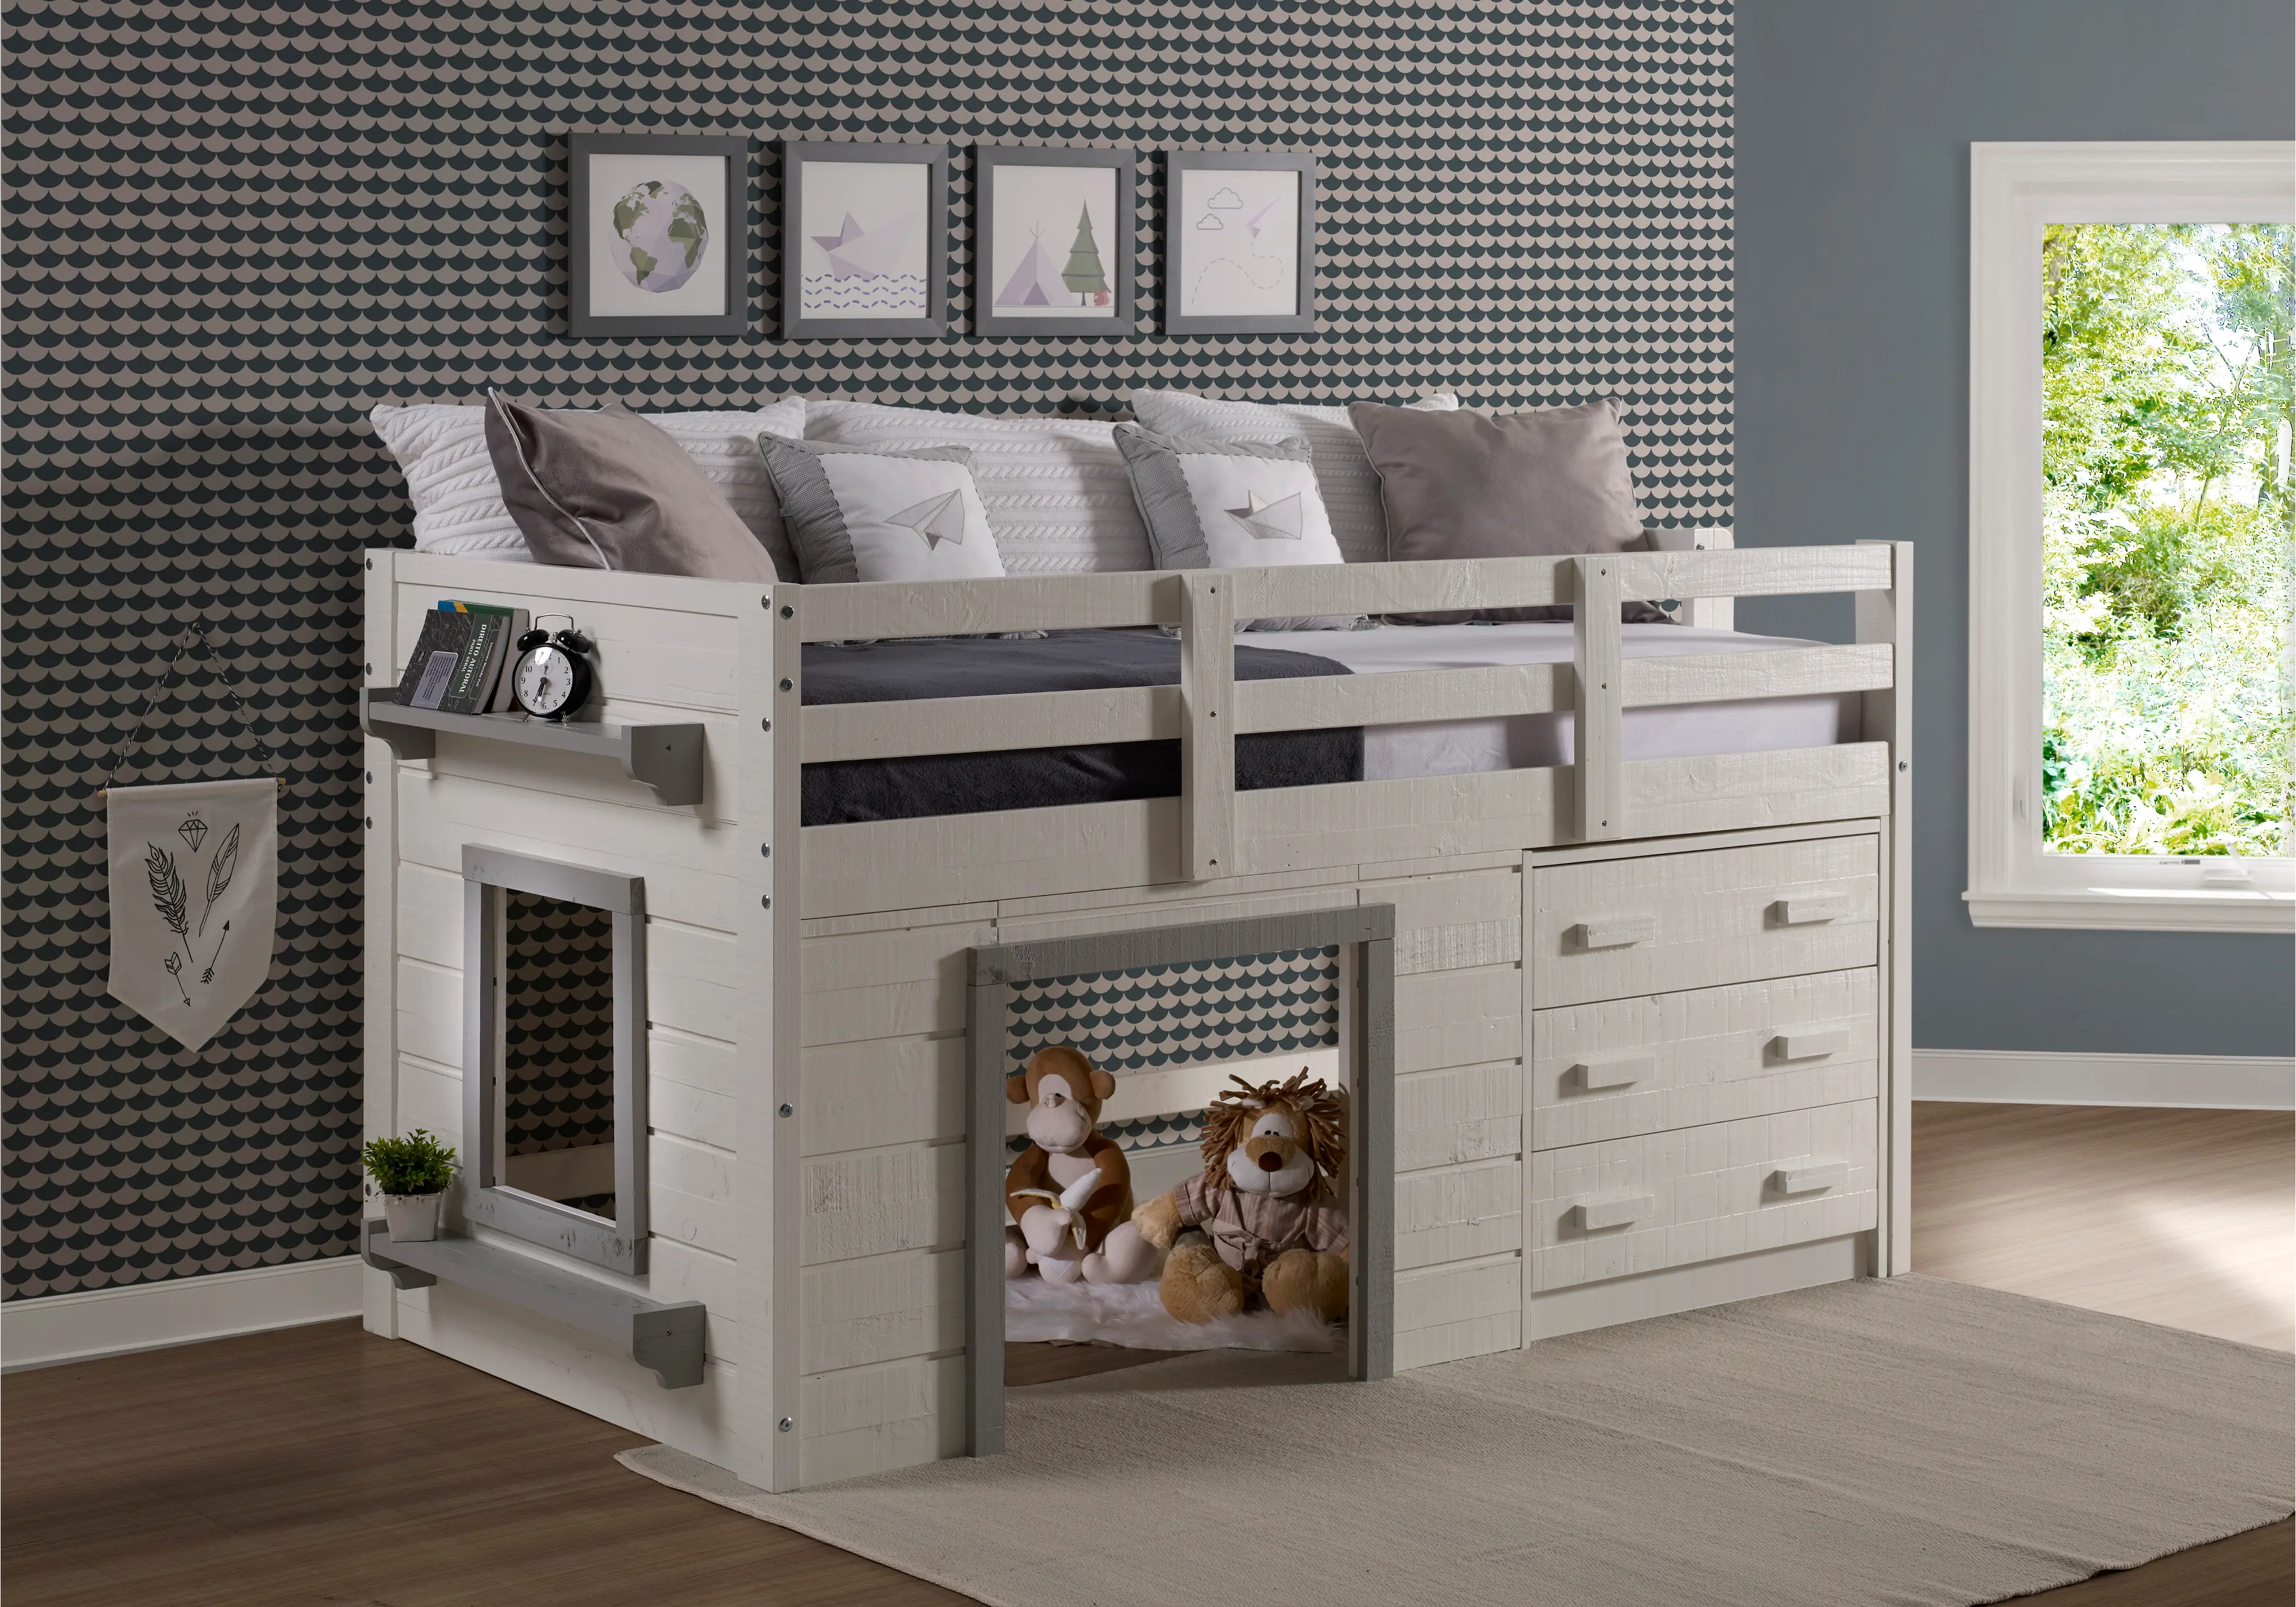 https://static.rcwilley.com/products/112309666/Sweet-Dreams-White-and-Gray-Twin-Low-Loft-Bed-rcwilley-image1.webp